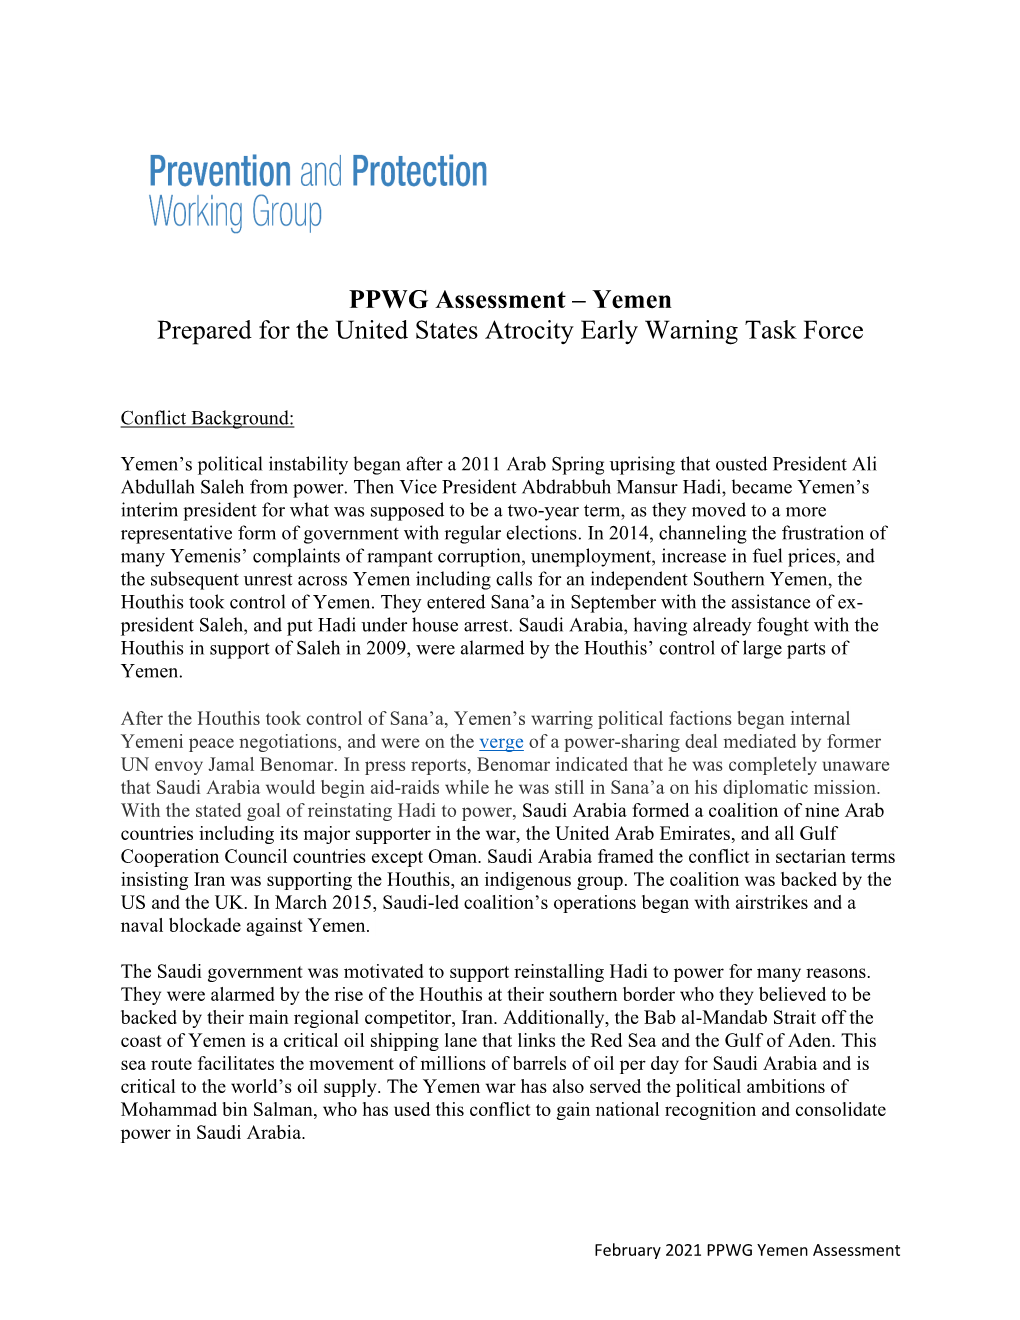 PPWG Assessment – Yemen Prepared for the United States Atrocity Early Warning Task Force